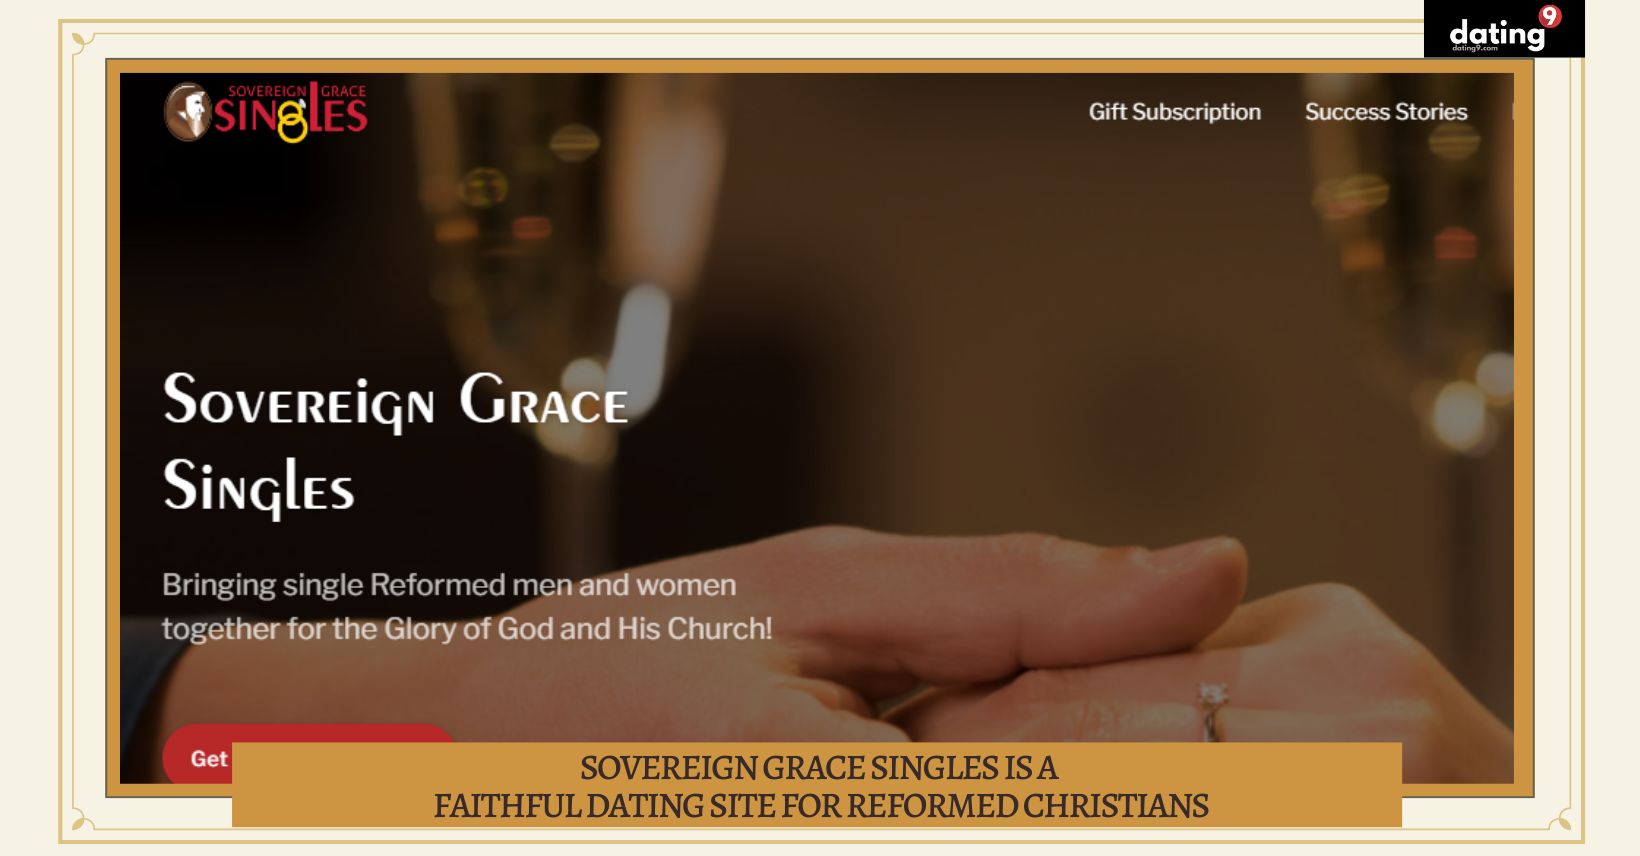 Sovereign Grace Singles is a Faithful Dating Site for Reformed Christians